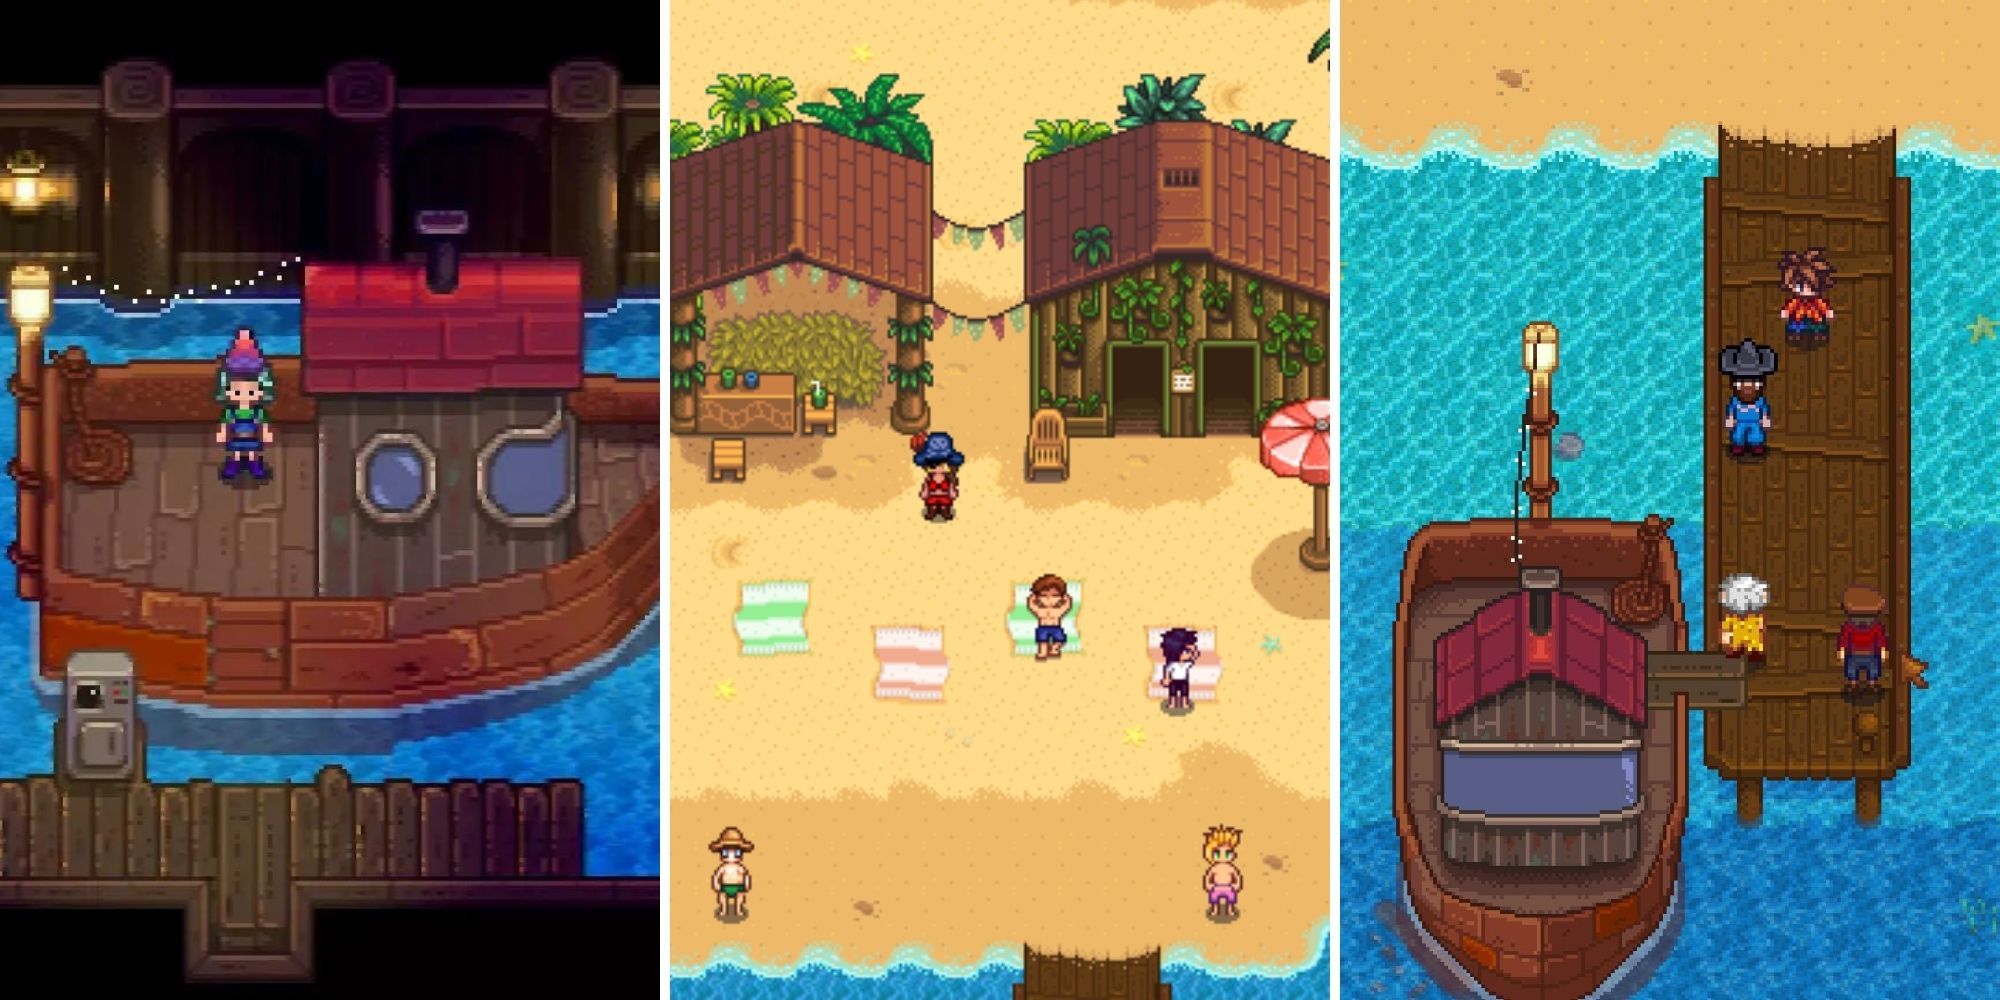 Stardew Valley Ginger Island - Willy's Boat left, Resort in centre, docks on right